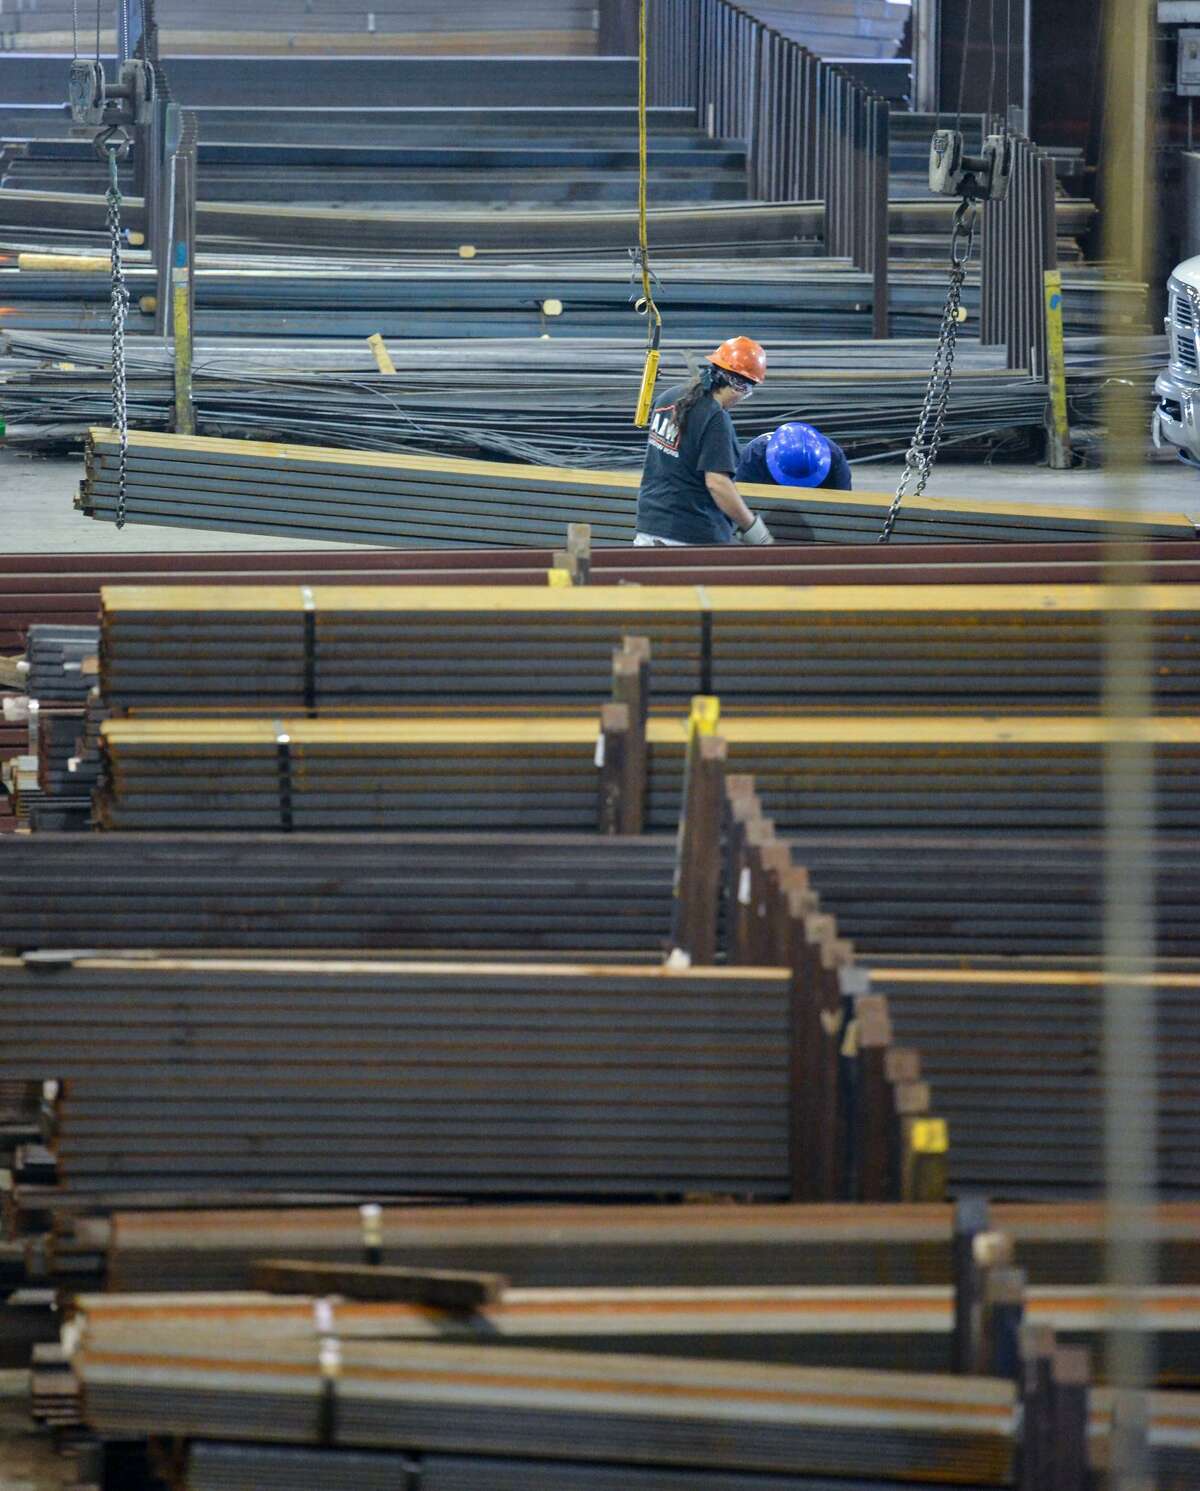 Workers move material at Alamo Iron Works. New tariffs on steel have brought higher prices for many manufacturers and construction firms and considerable uncertainty for both importers and domestic manufacturers of steel and aluminum.